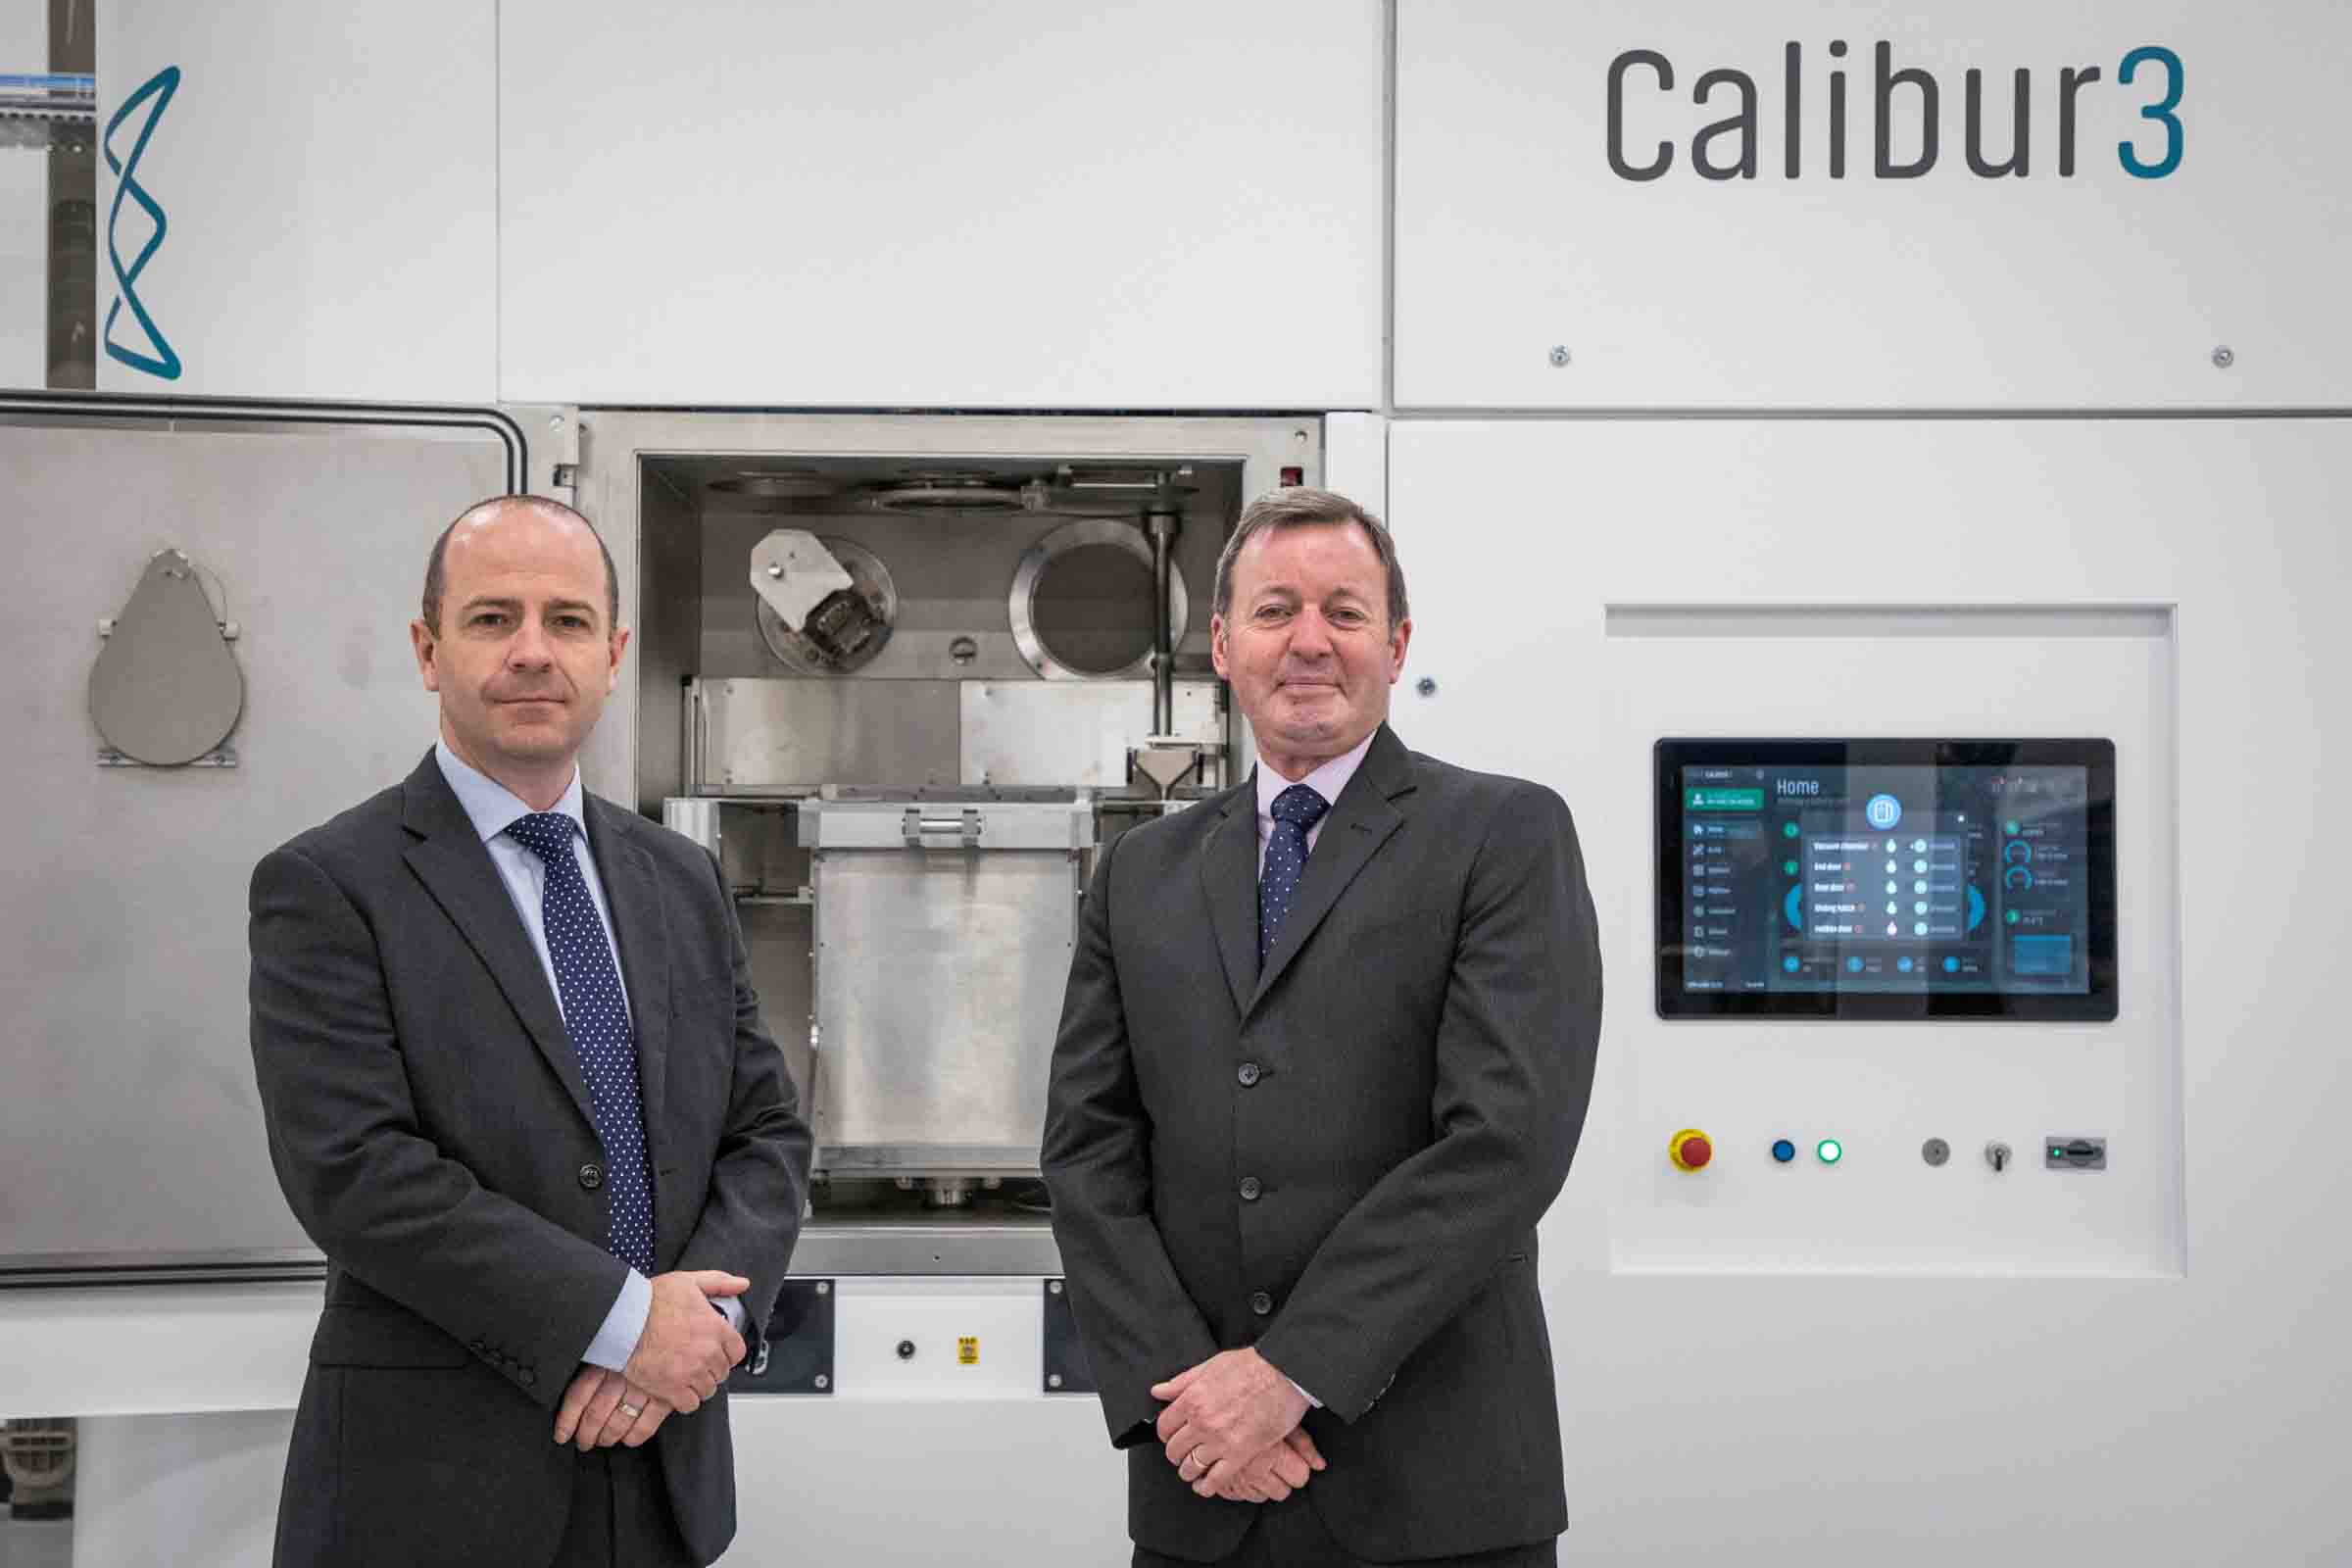 From left to right: Group Captain Craig Watson and Squadron Leader Allen Auchterlonie on front of the Wayland Additive Calibur3 3D printer